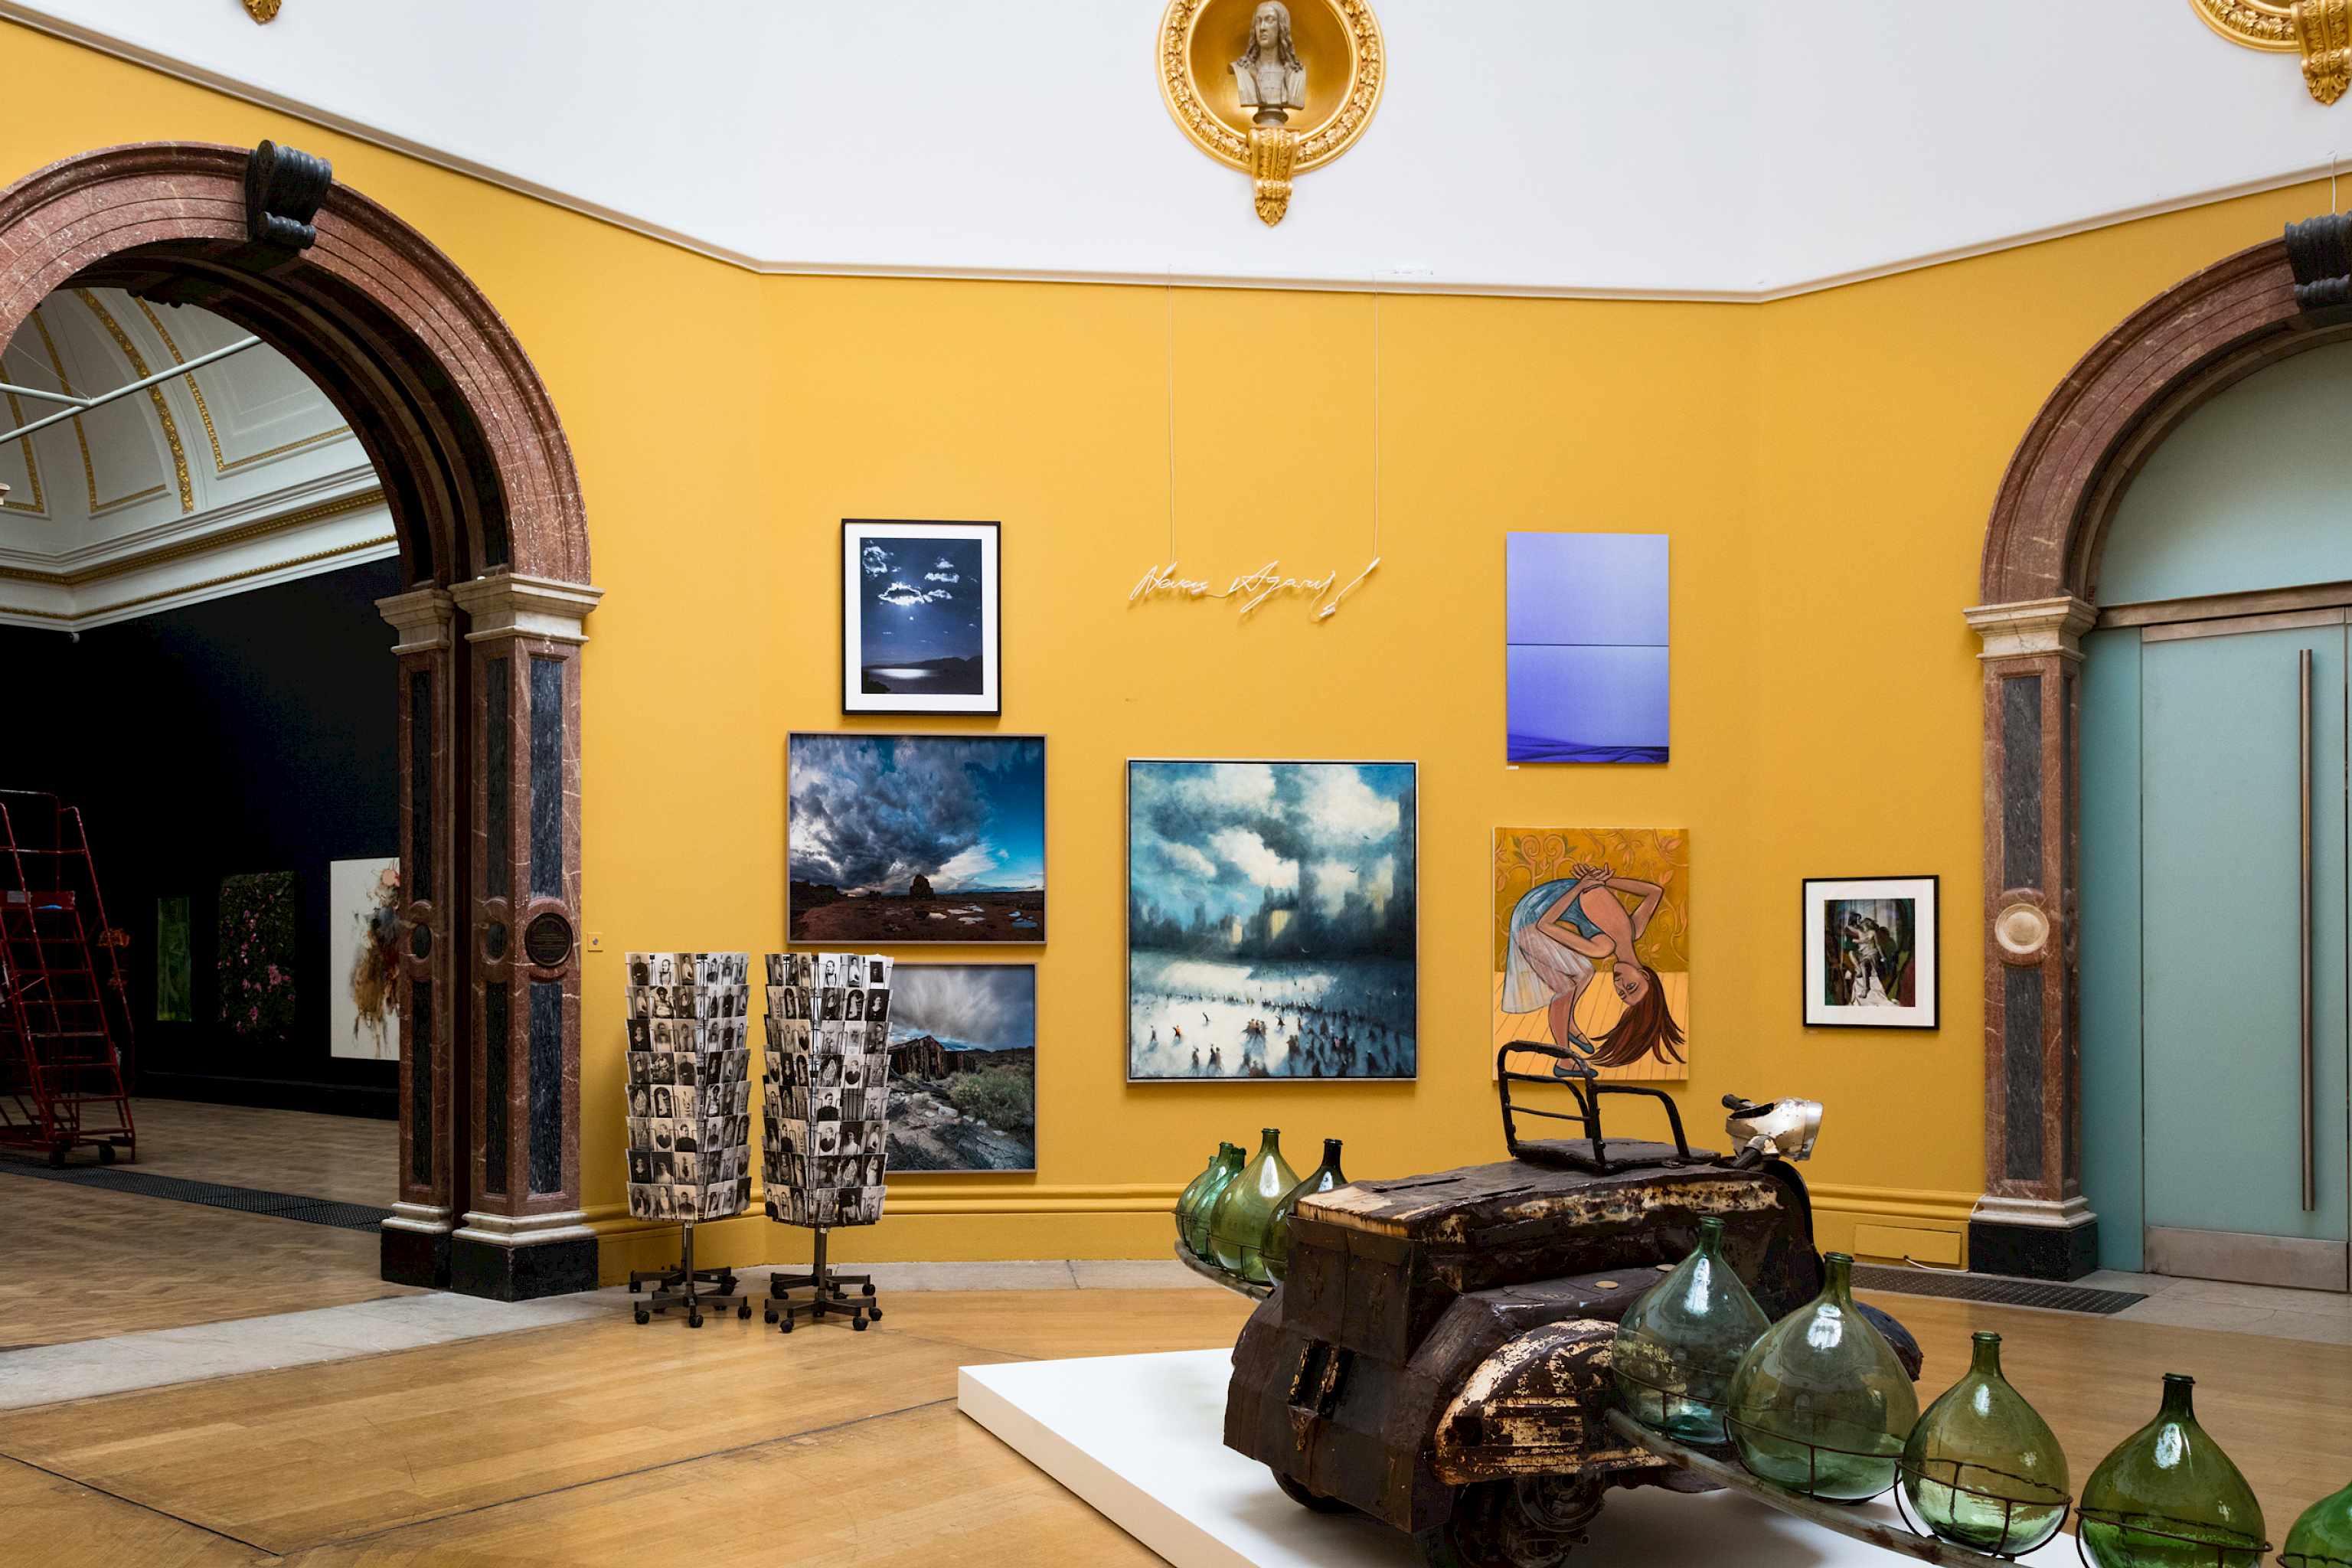 Installation view, photograph by Scott Mead